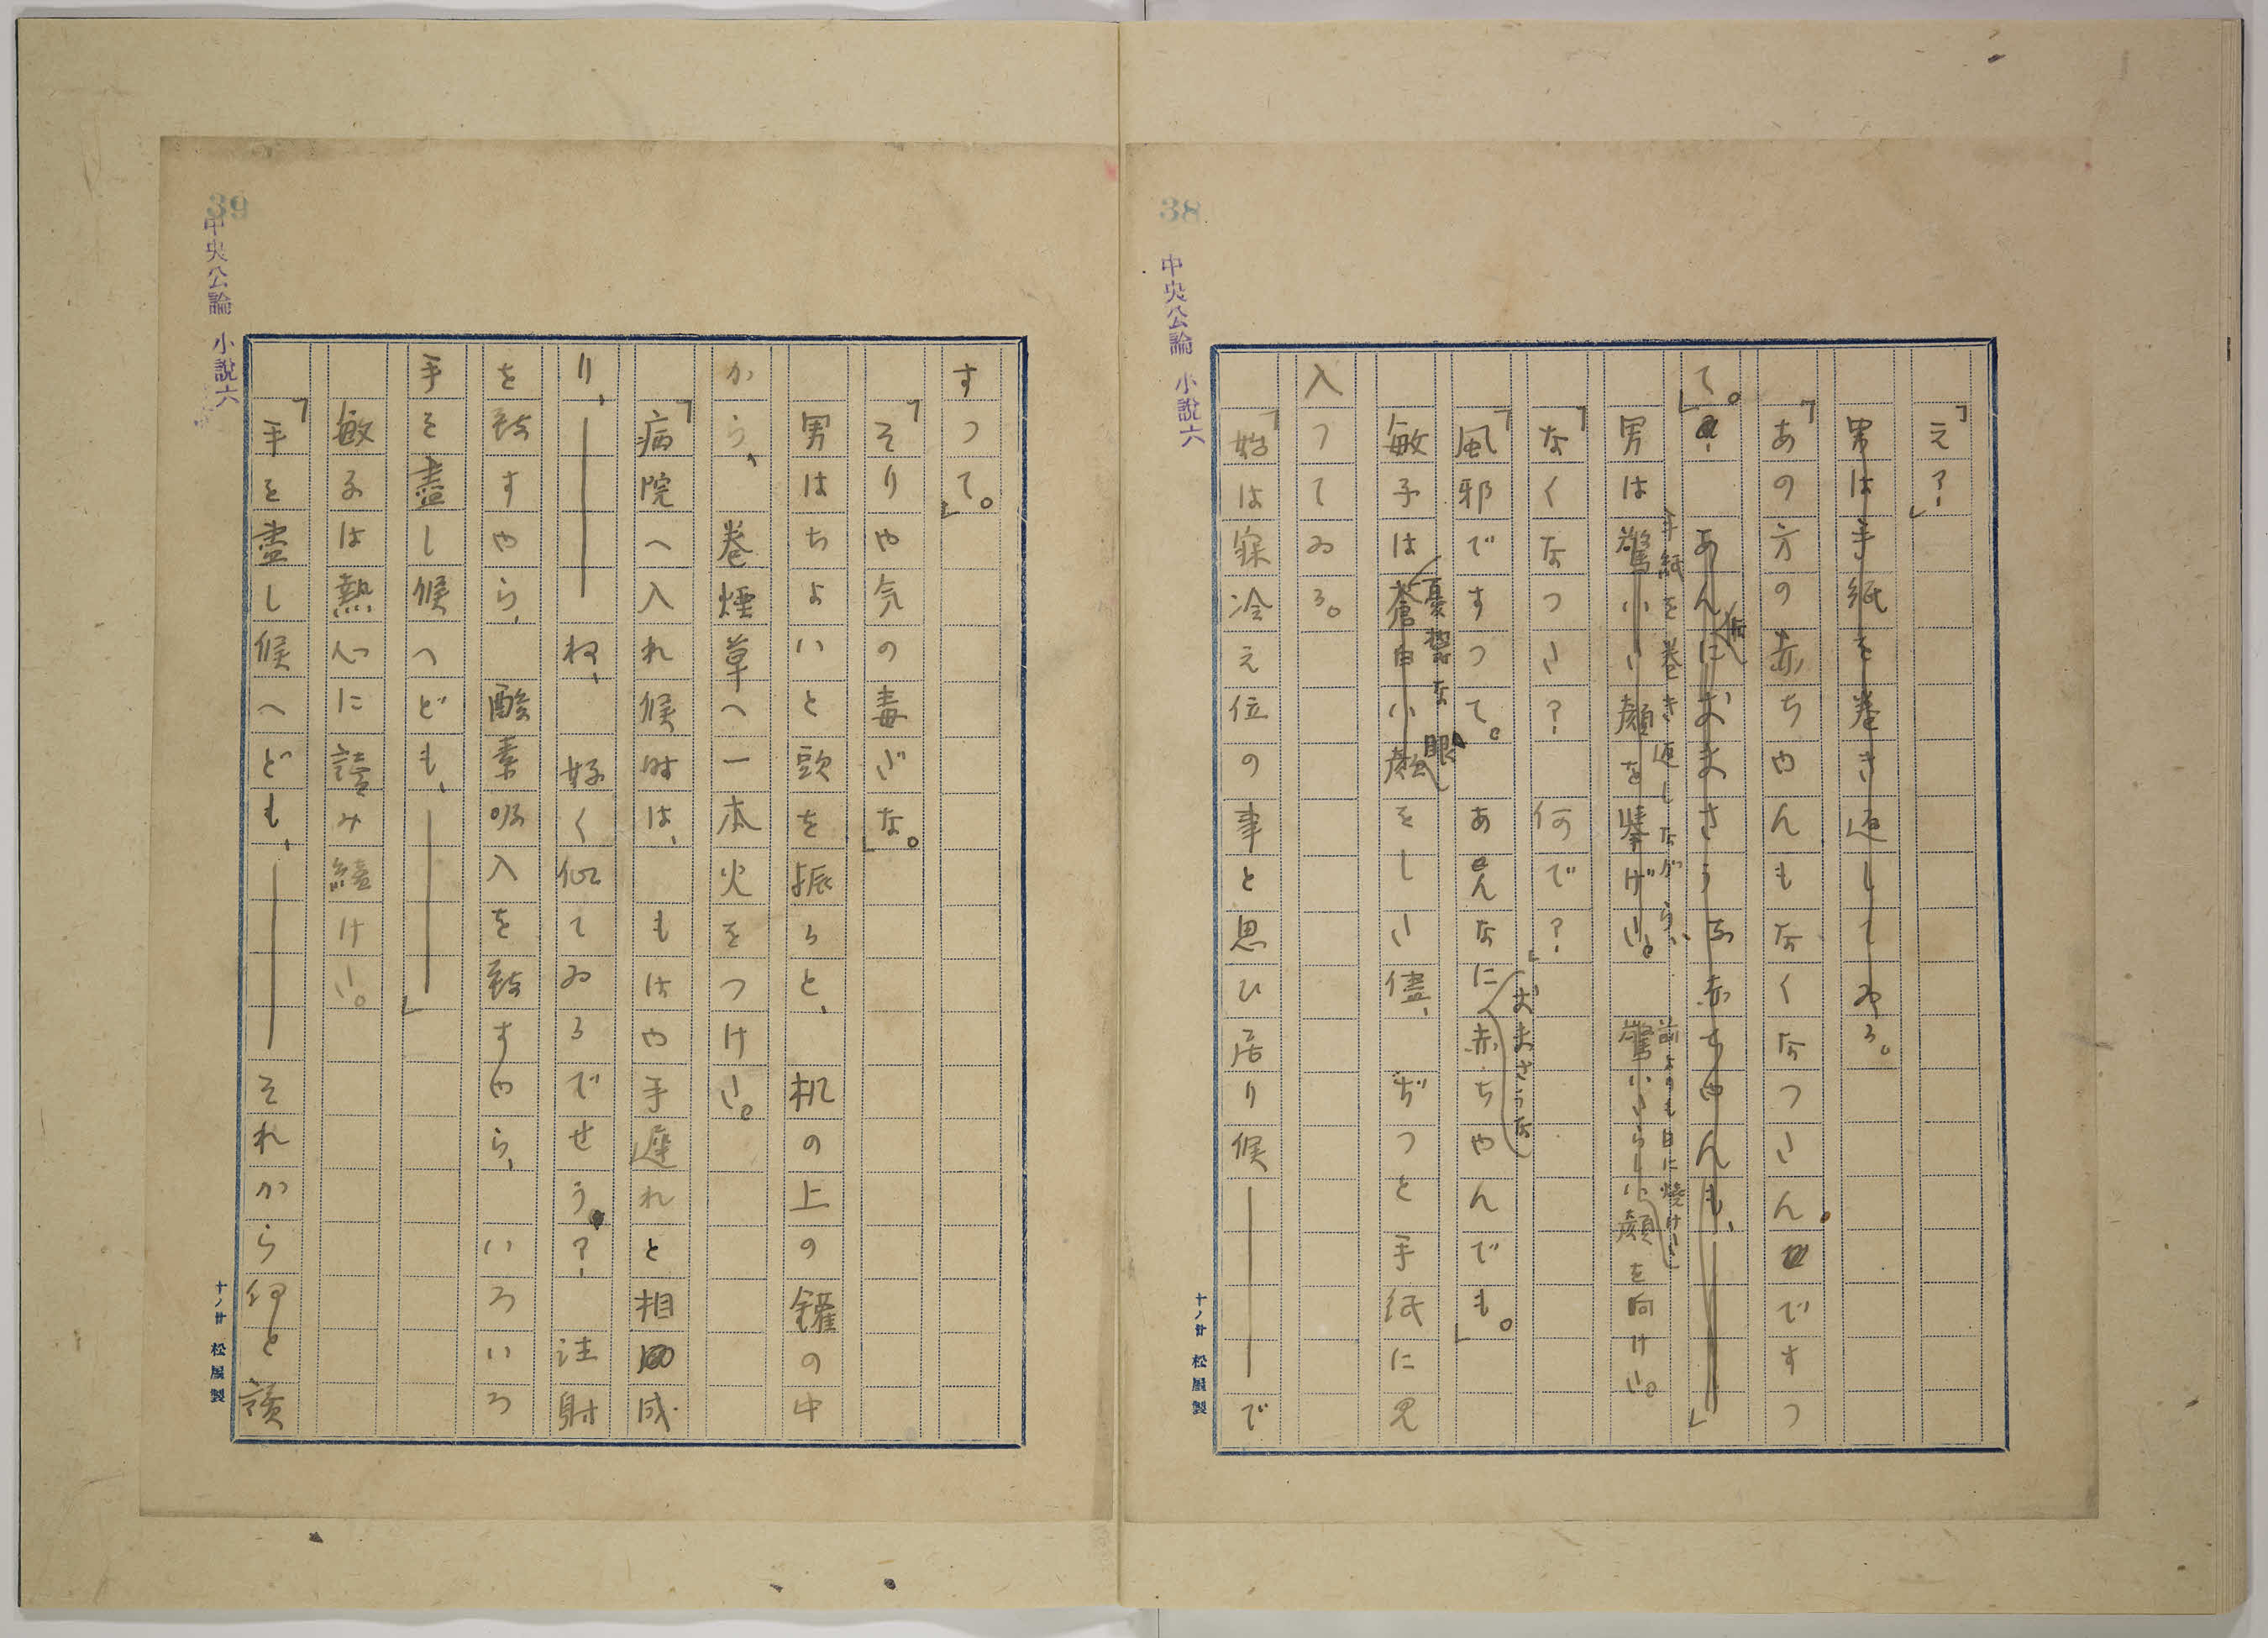 C2.翻刻完了作品/ Completed Transcription Texts